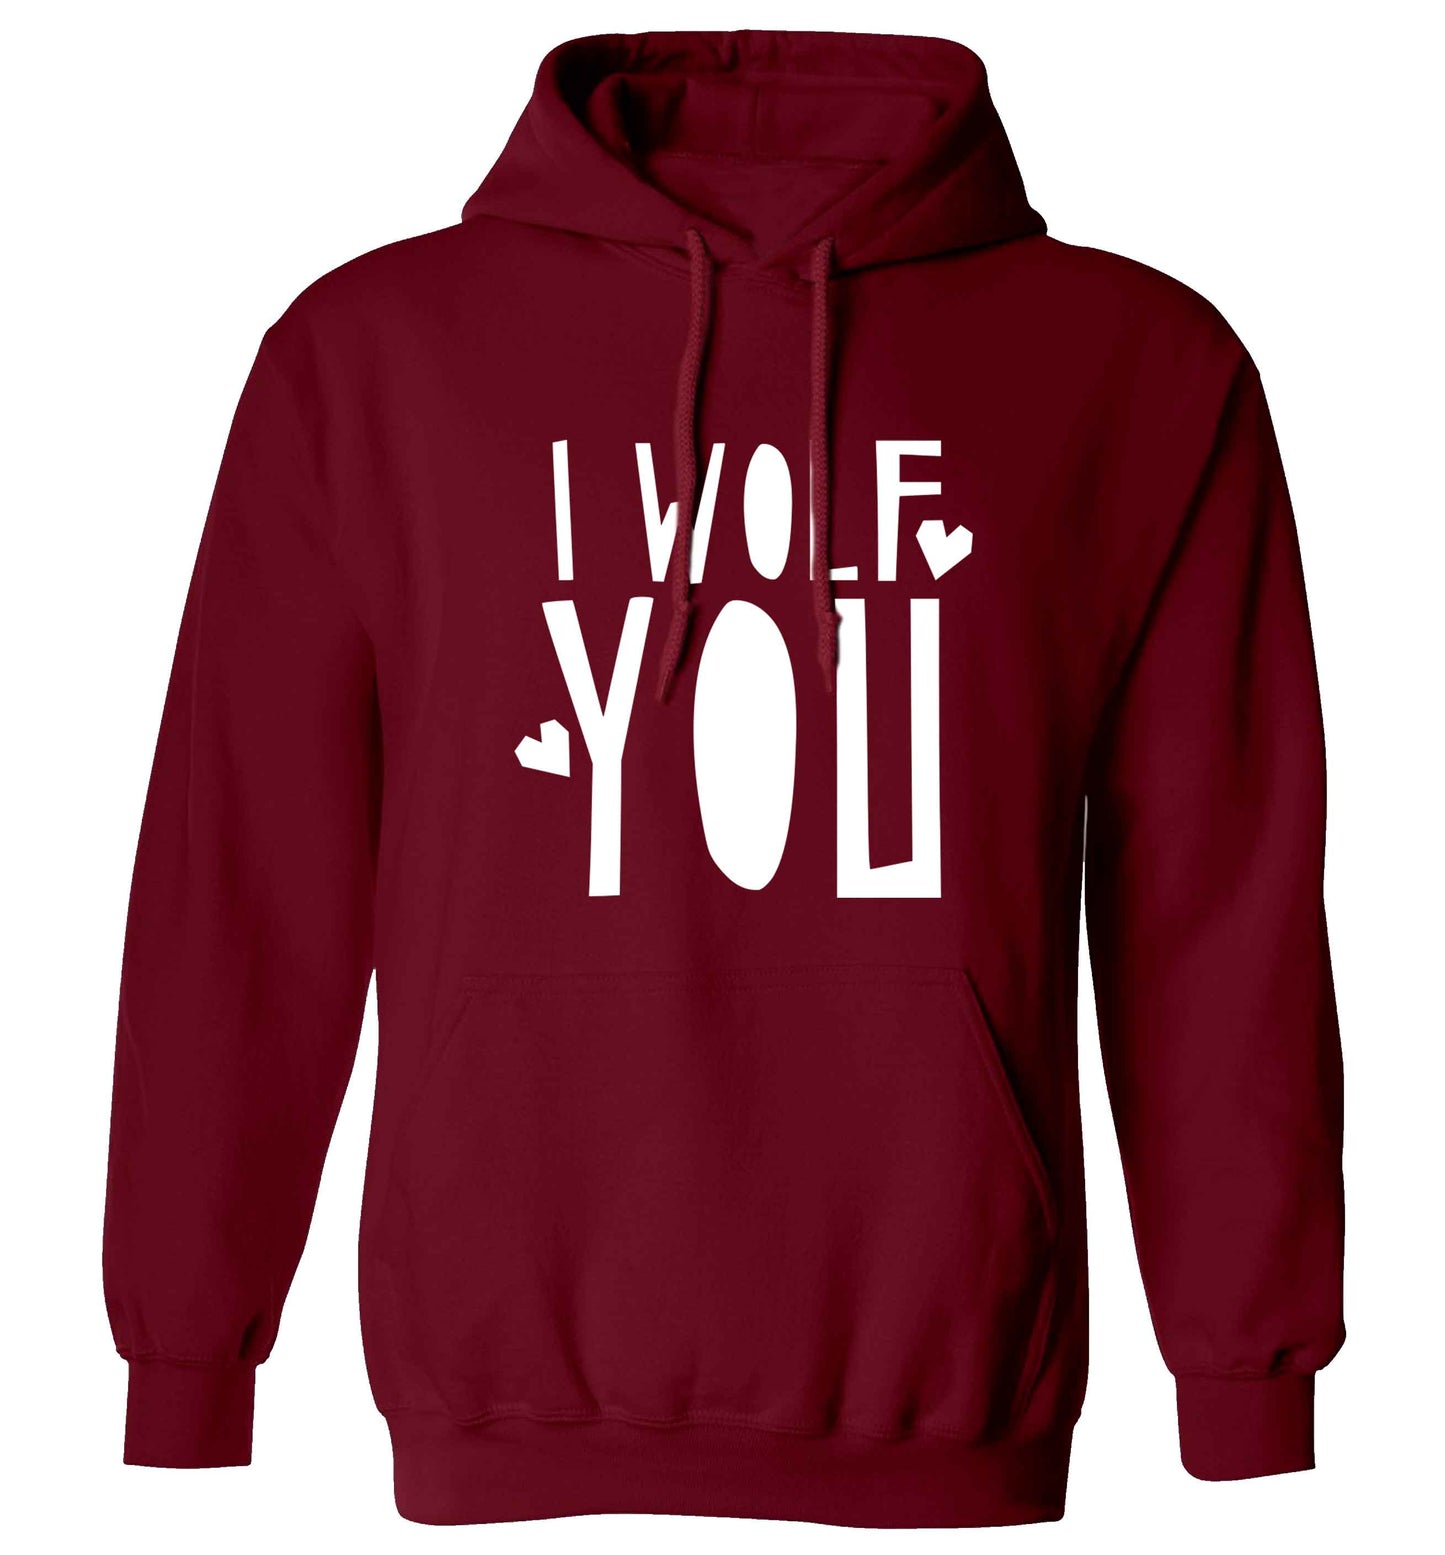 I wolf you adults unisex maroon hoodie 2XL